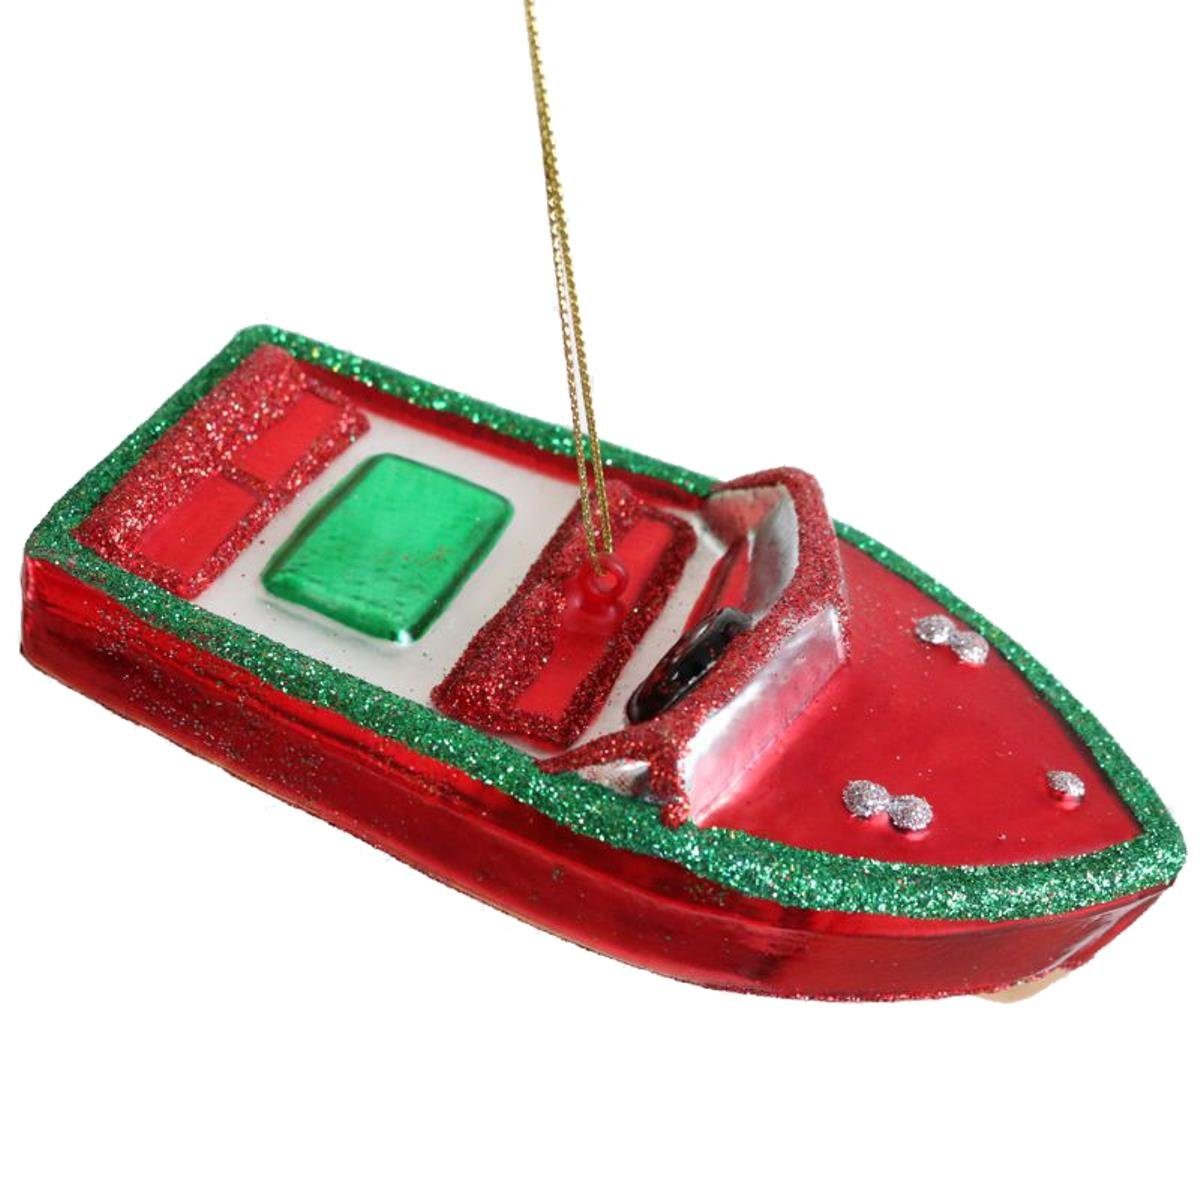 (1-tlg) Company Sportboot Hänger Christbaumschmuck Giftcompany Gift